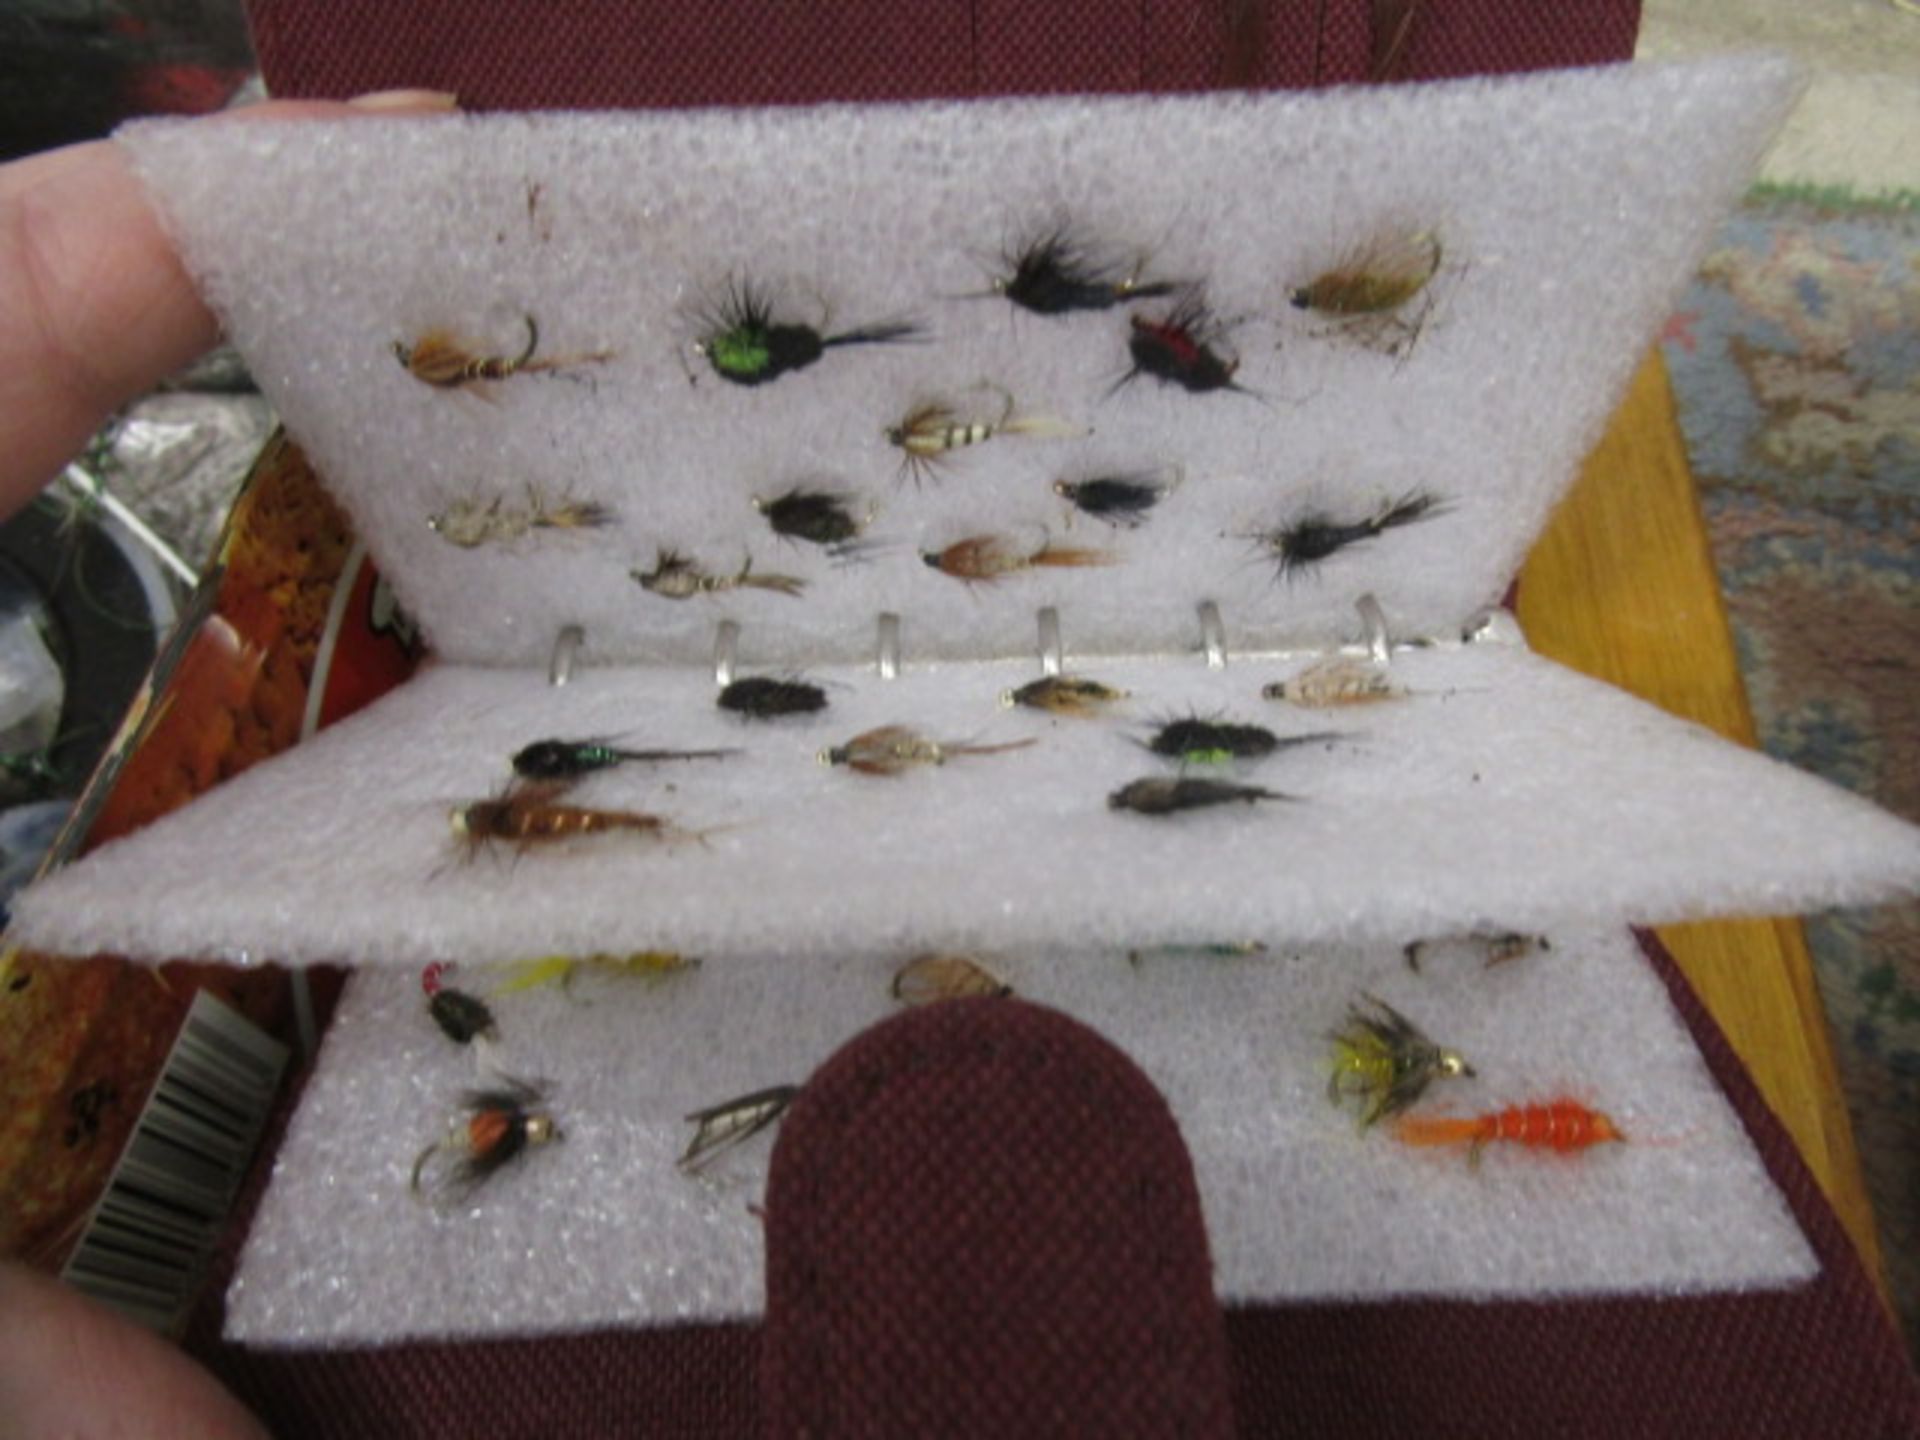 Fly fishing lot- hand tied flies and materials for making fly's, a book and various other related - Image 7 of 12